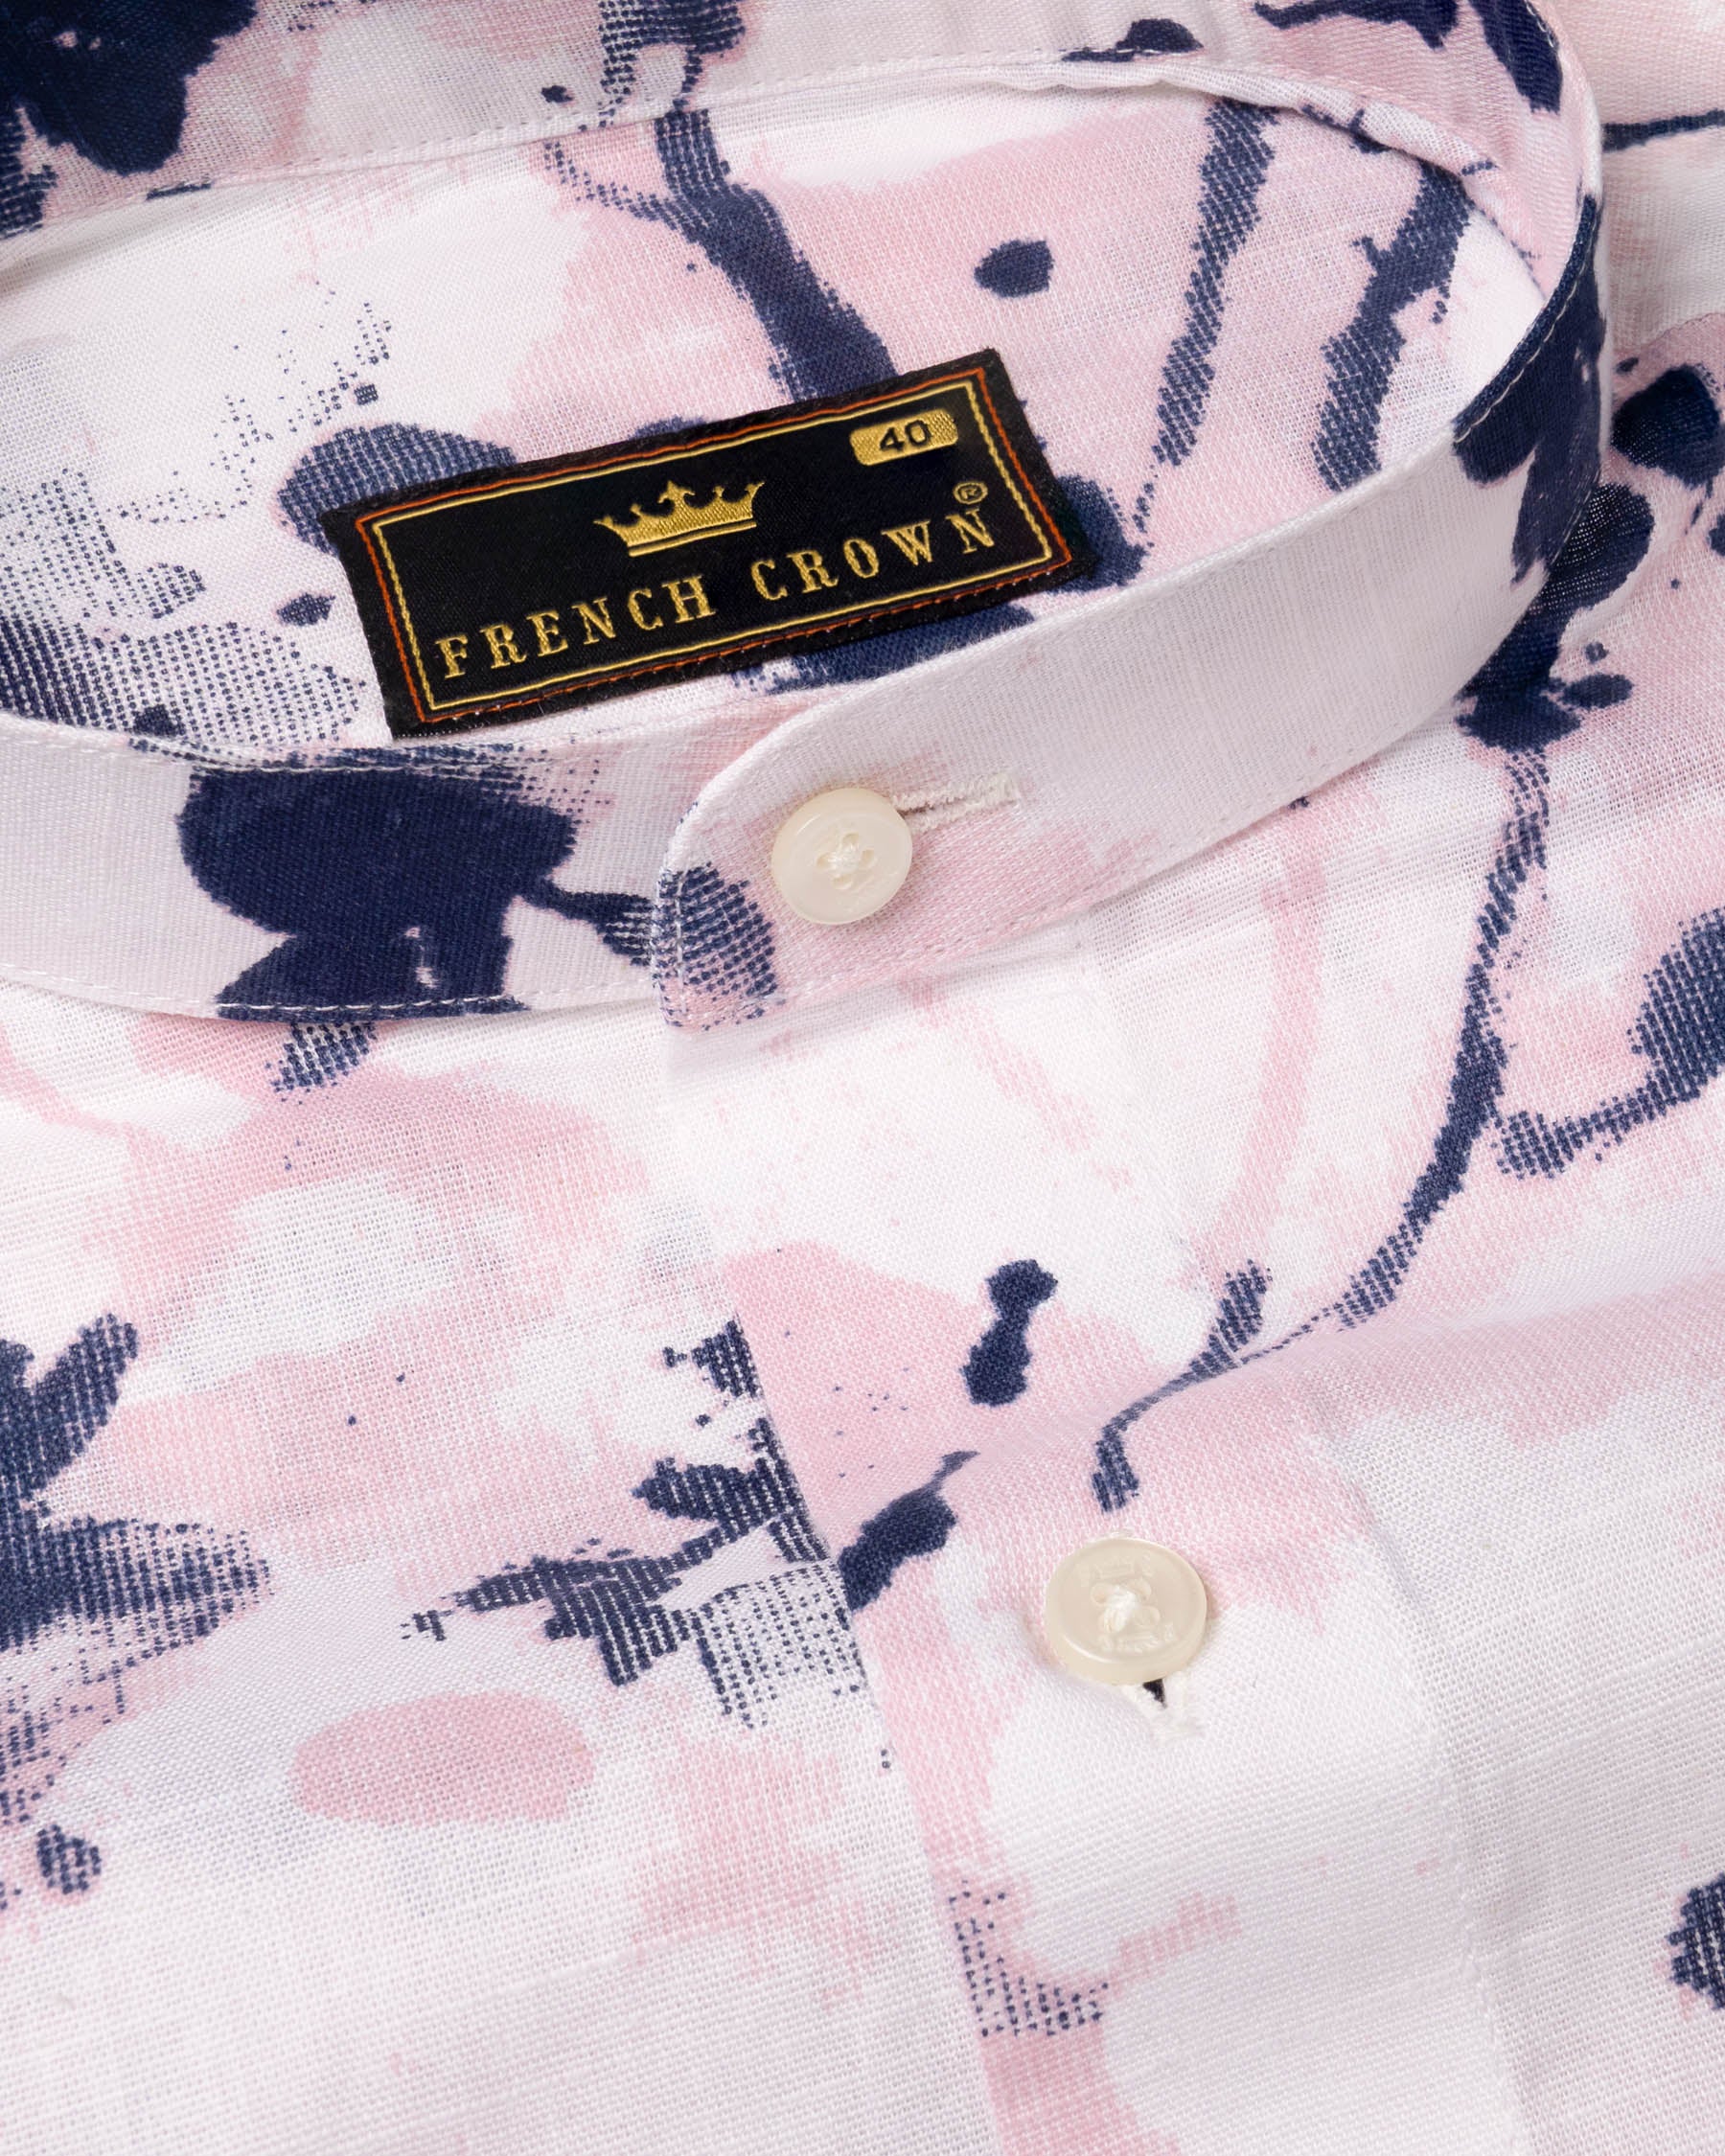 Oyster Pink Floral Printed Luxurious Linen Shirt 6293-M-38, 6293-M-H-38, 6293-M-39, 6293-M-H-39, 6293-M-40, 6293-M-H-40, 6293-M-42, 6293-M-H-42, 6293-M-44, 6293-M-H-44, 6293-M-46, 6293-M-H-46, 6293-M-48, 6293-M-H-48, 6293-M-50, 6293-M-H-50, 6293-M-52, 6293-M-H-52